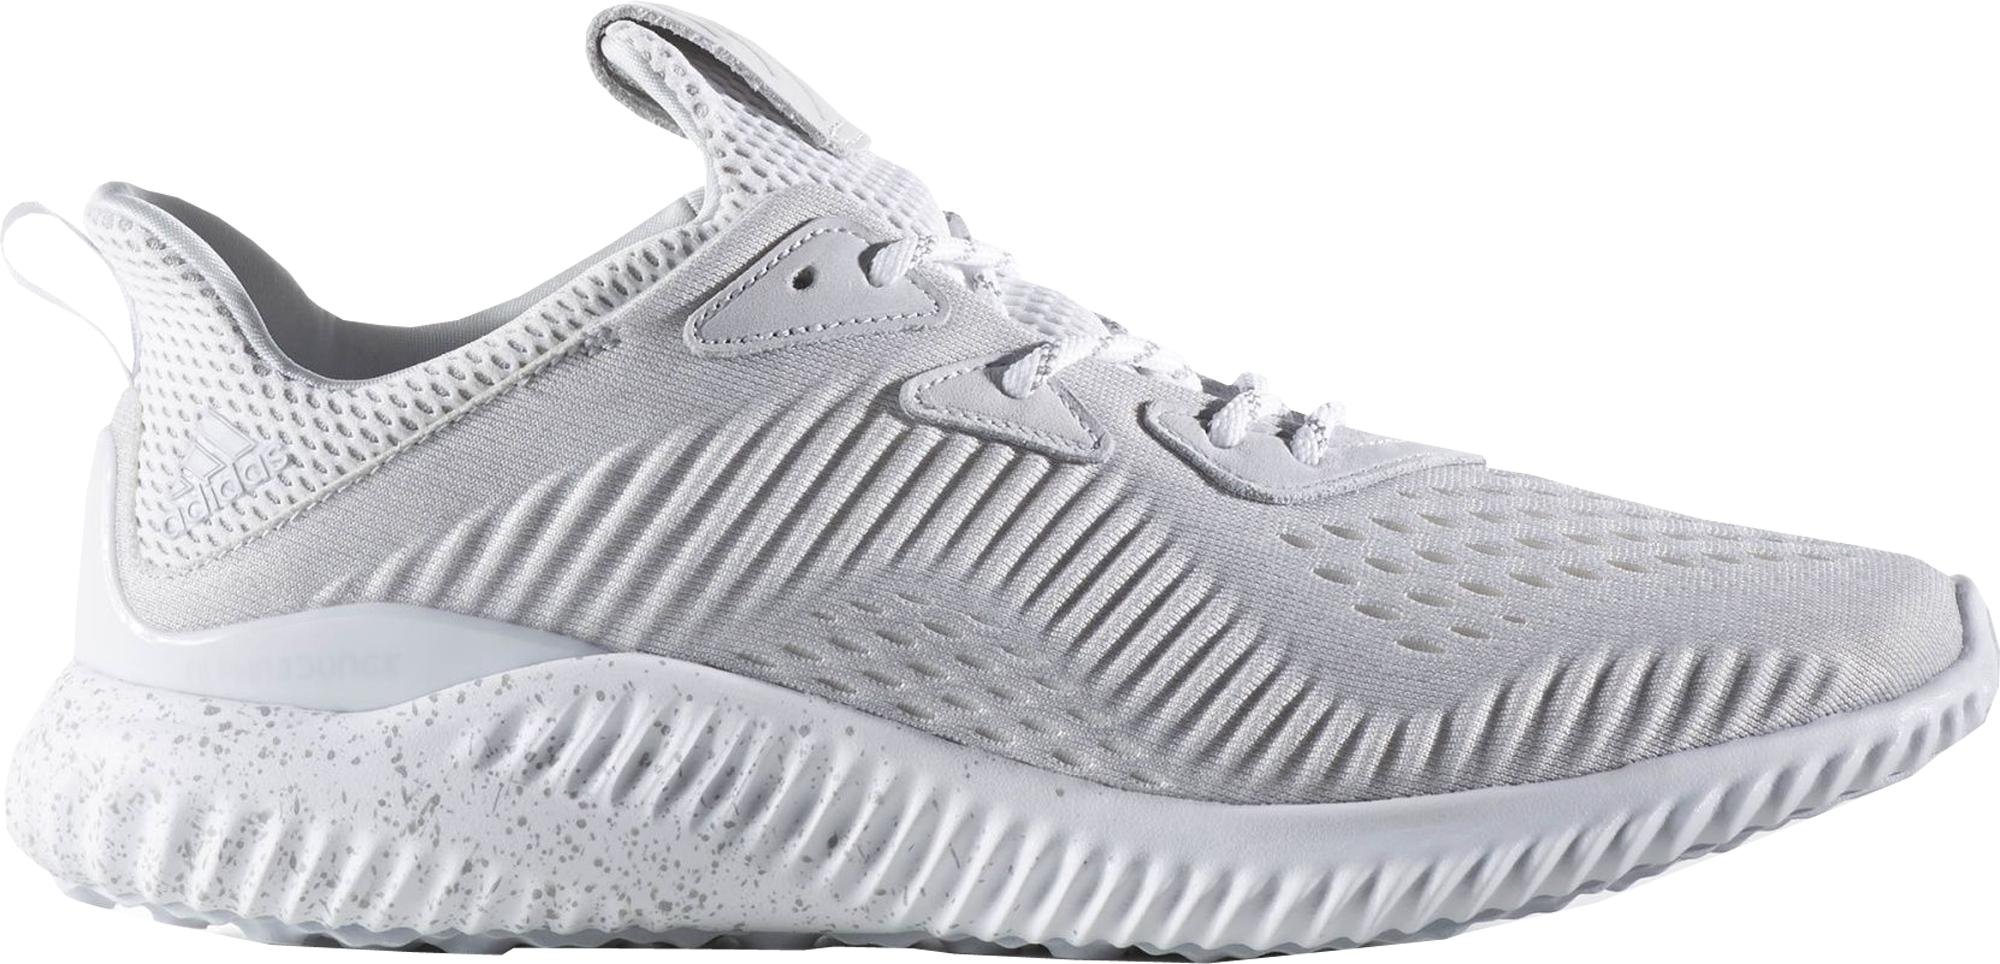 Reigning Champ x adidas AlphaBounce Grey